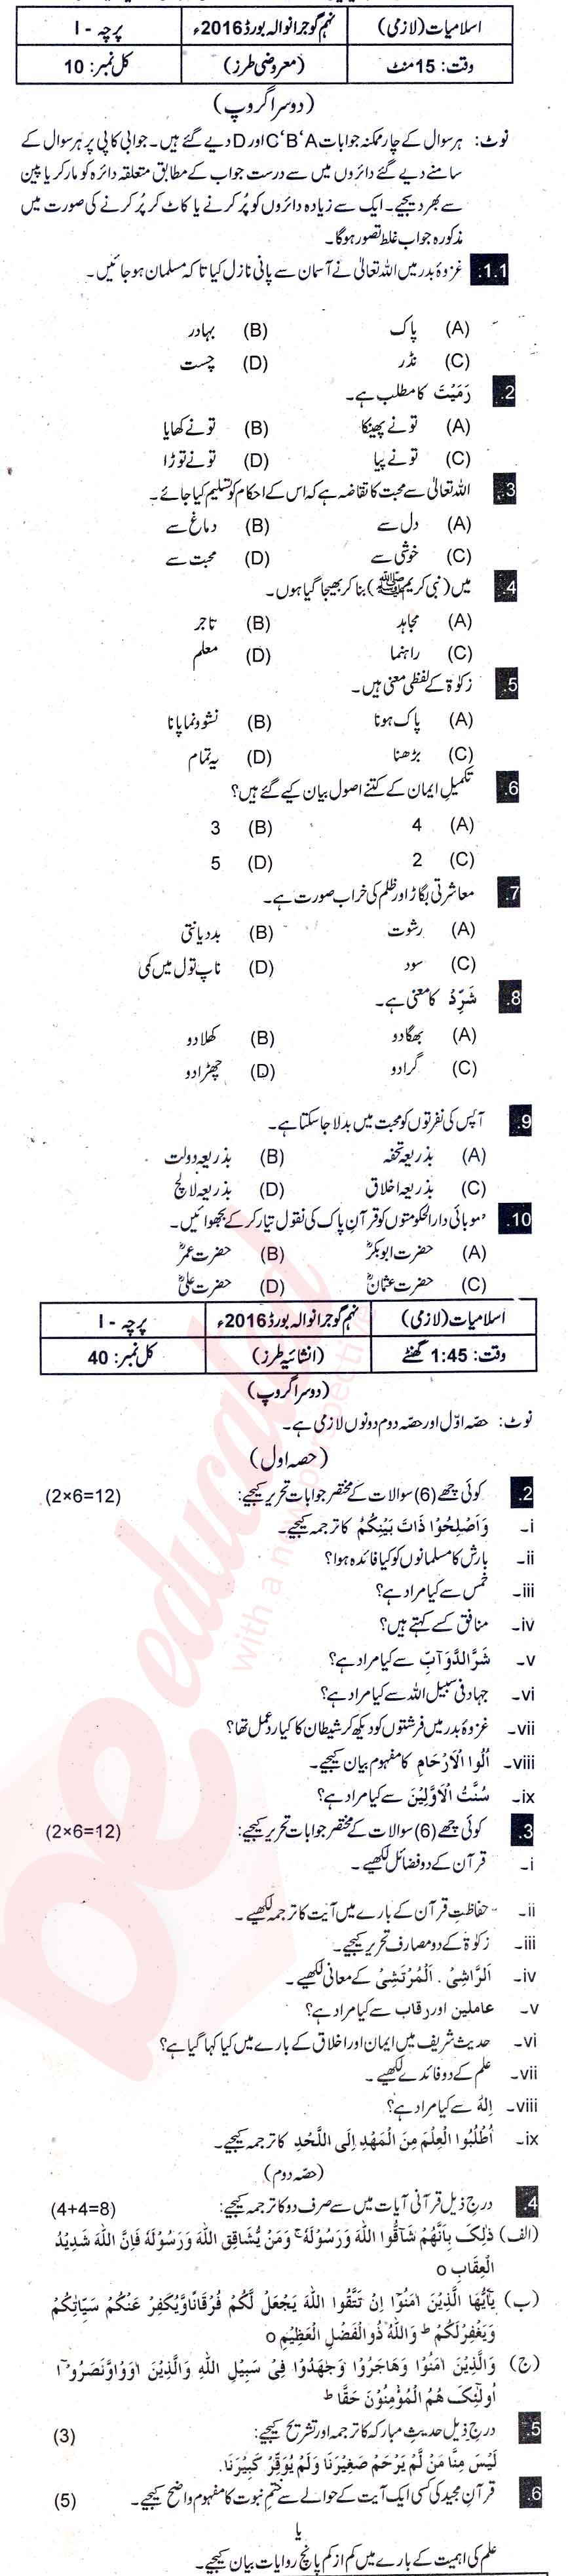 Islamiat (Compulsory) 9th class Past Paper Group 2 BISE Gujranwala 2016